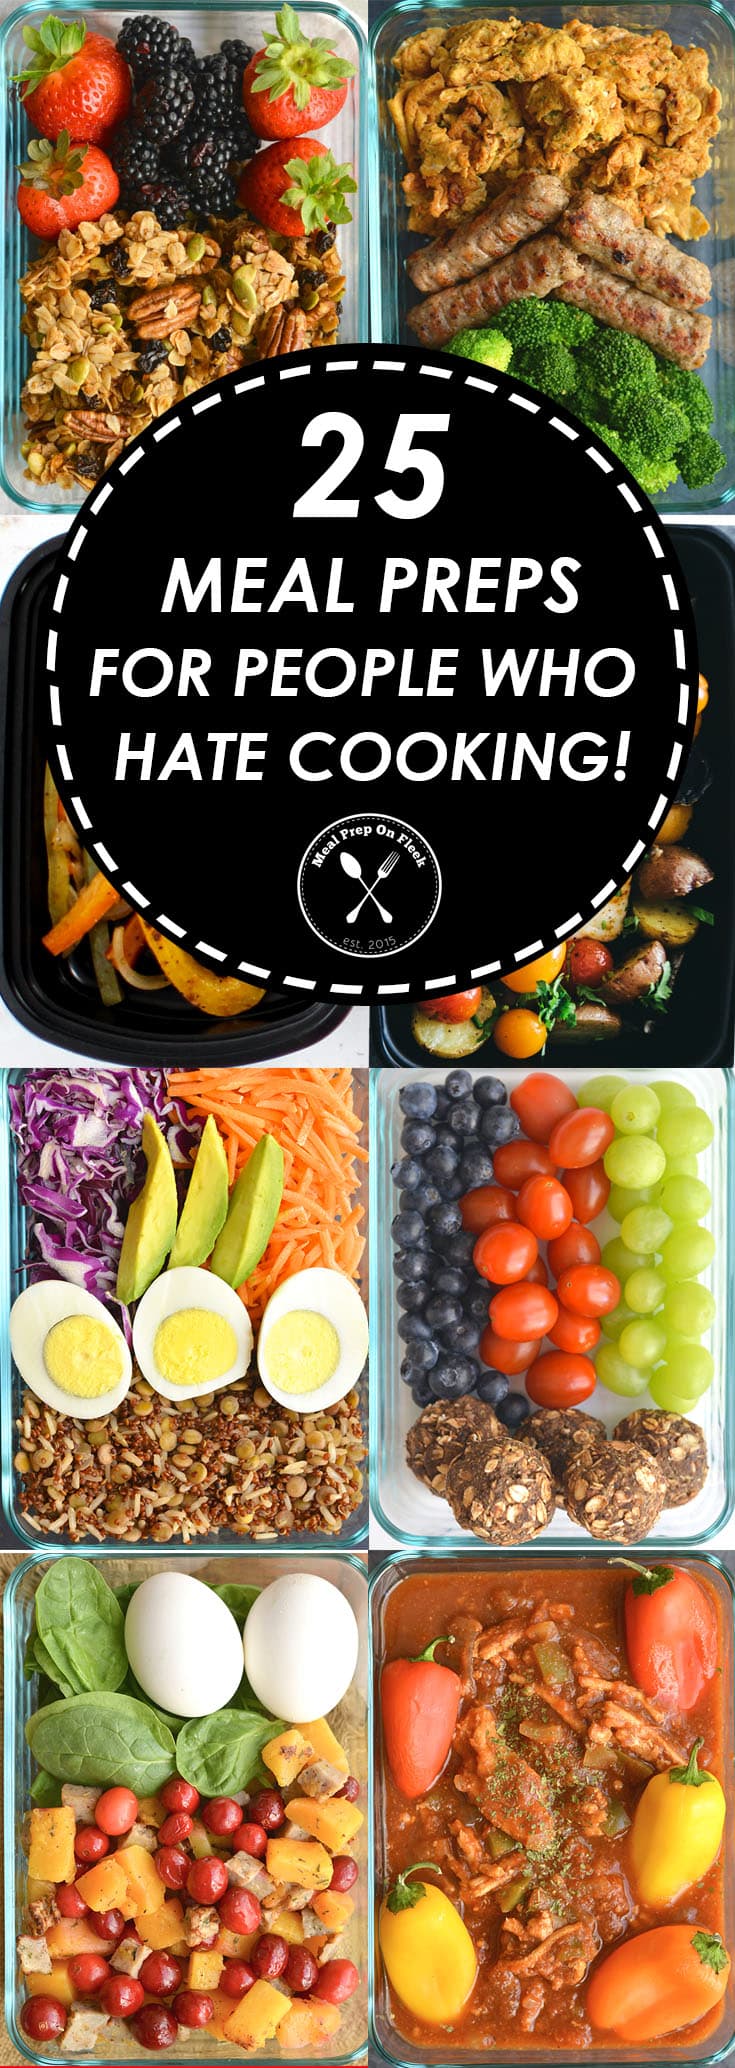 How to Meal Prep When You Hate Cooking: Tips to Try